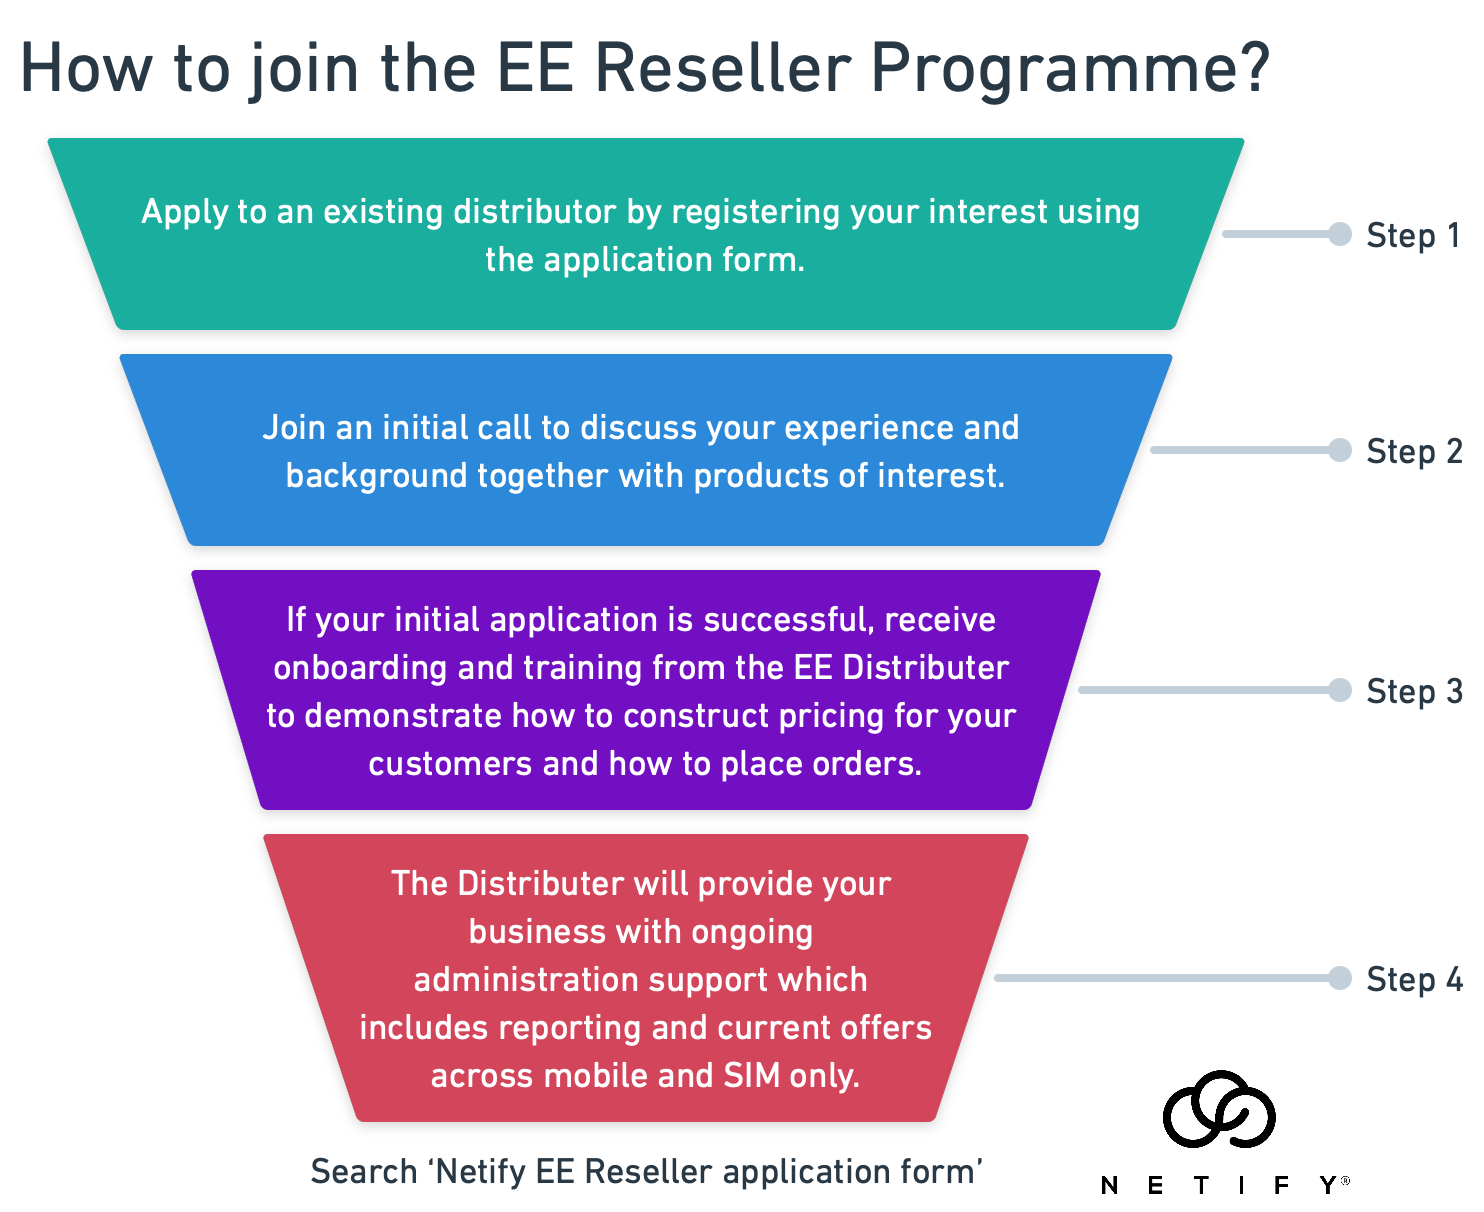 How to become an EE Reseller